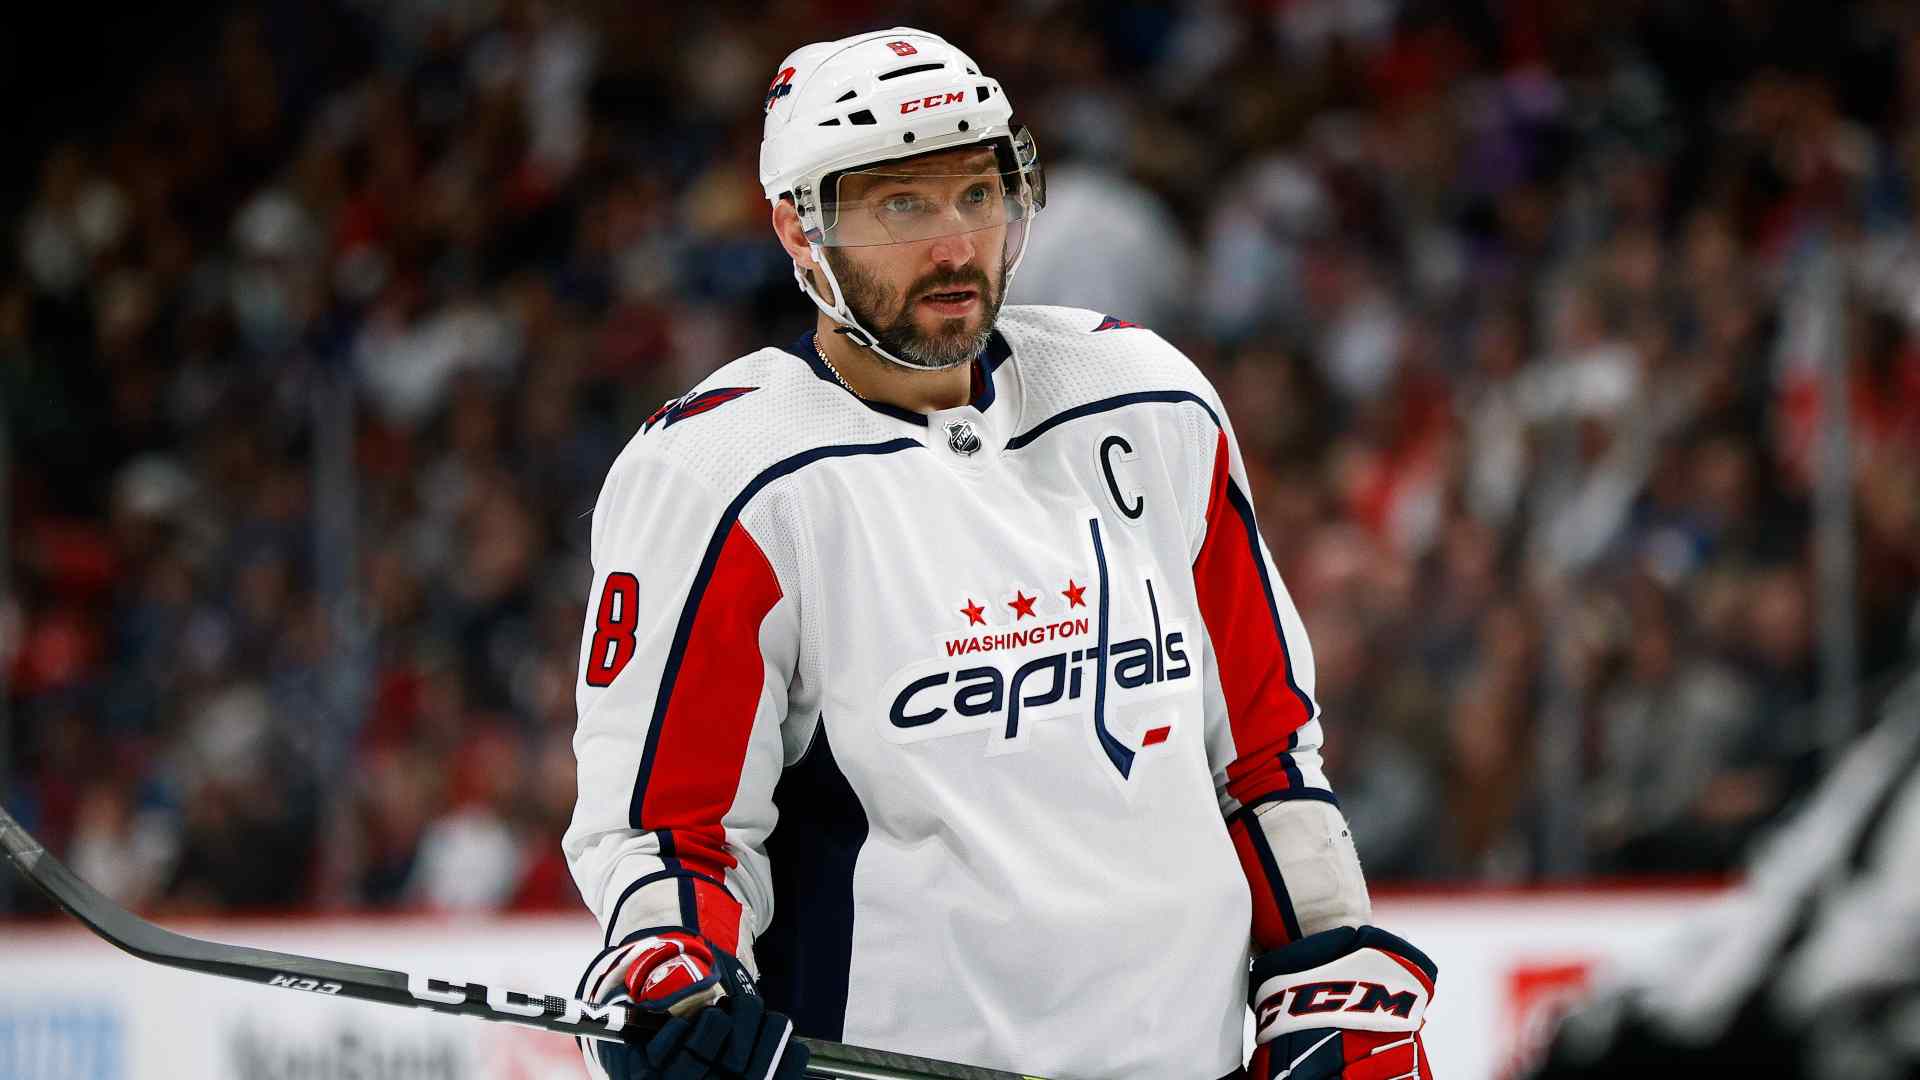 The Top 5 Hockey Players Who Should Have Never Changed Their